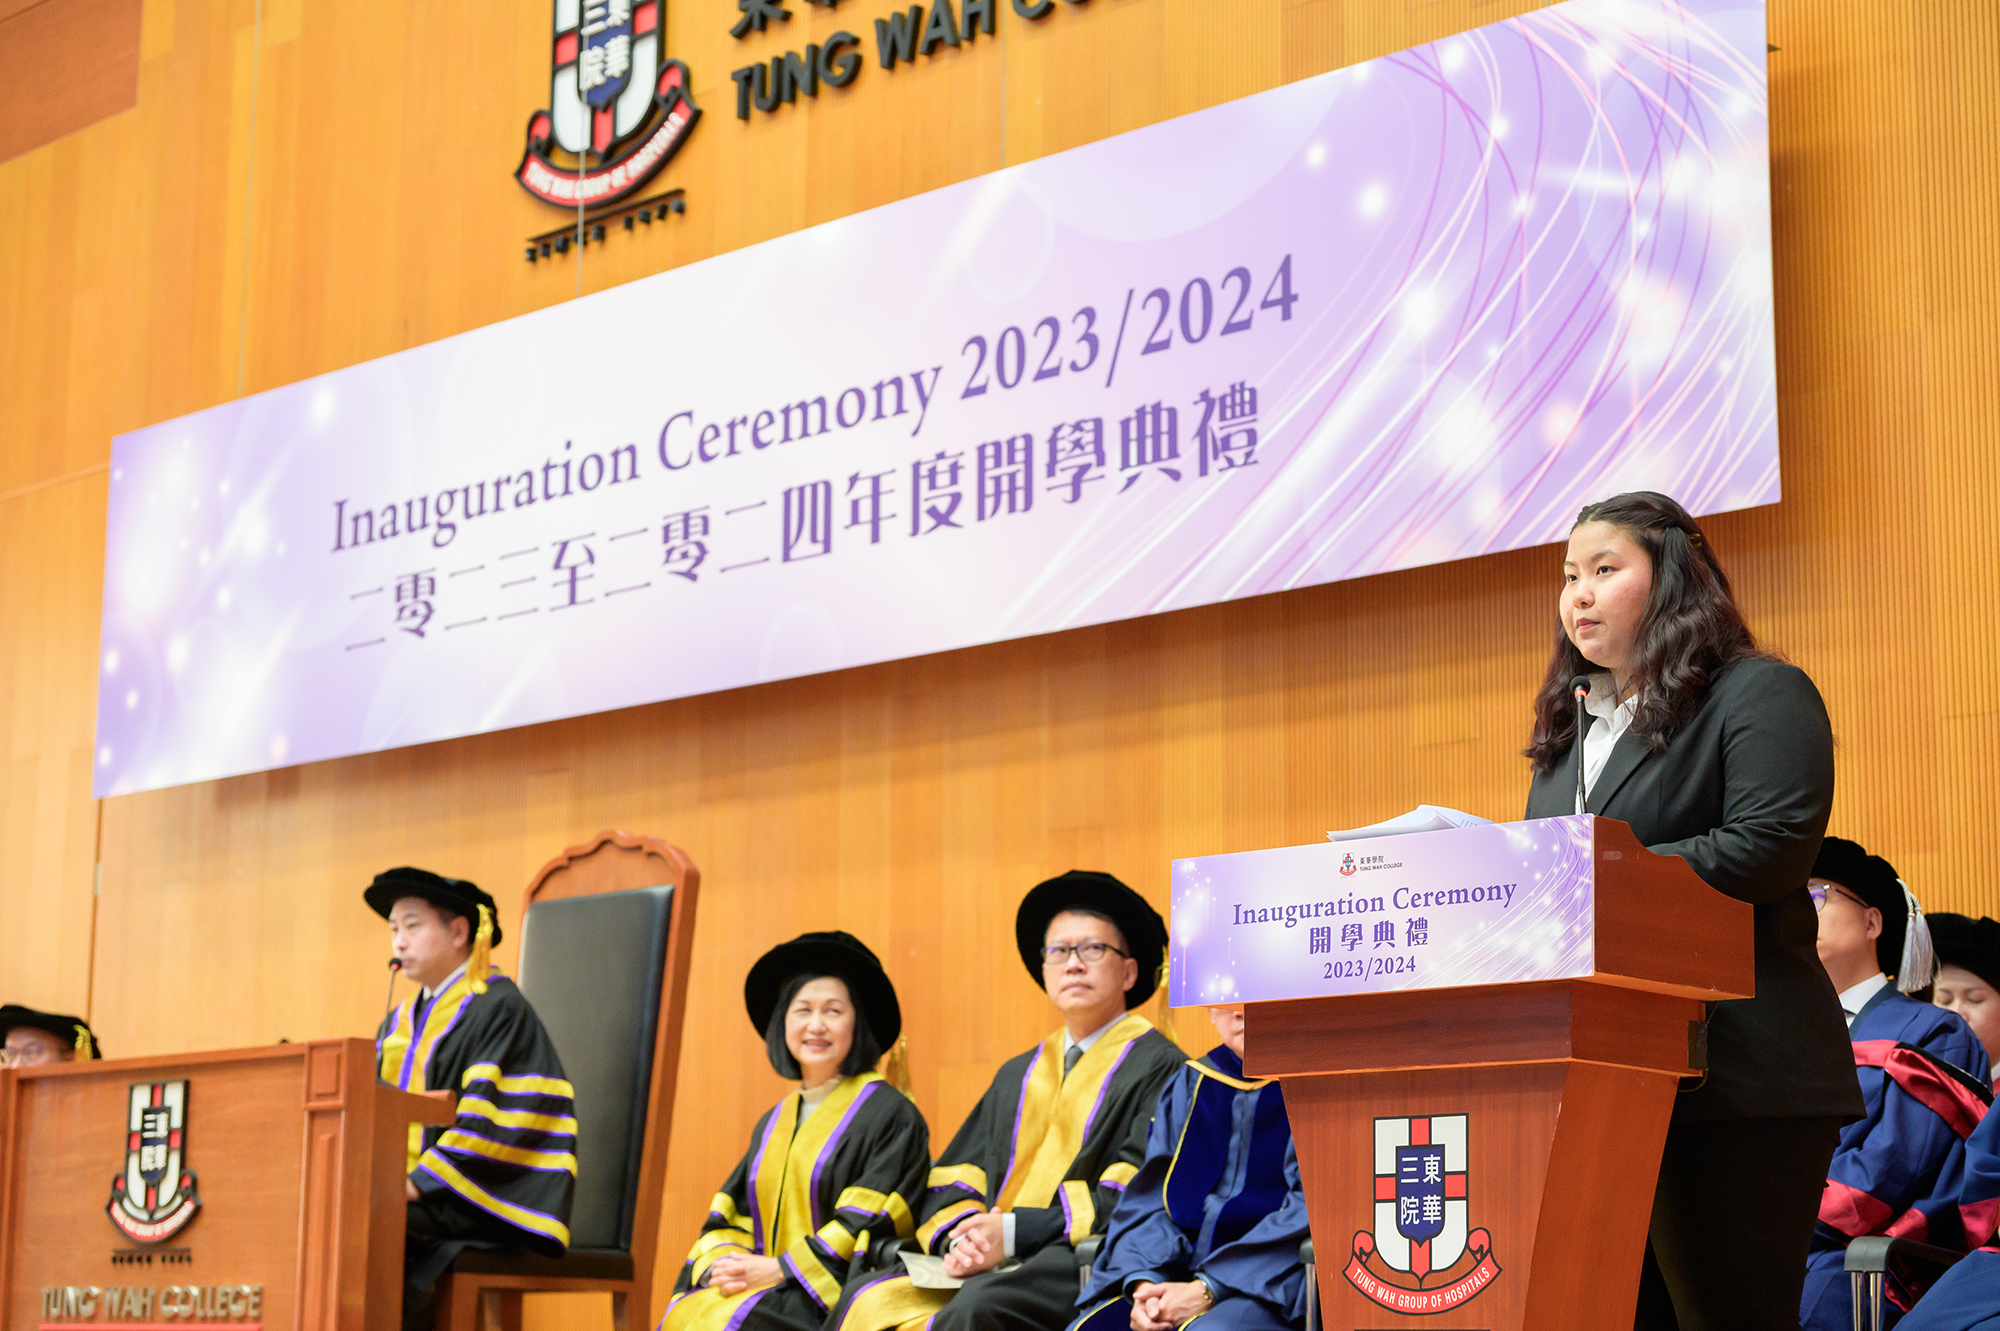 Tung Wah College Inauguration Ceremony 2023/2024